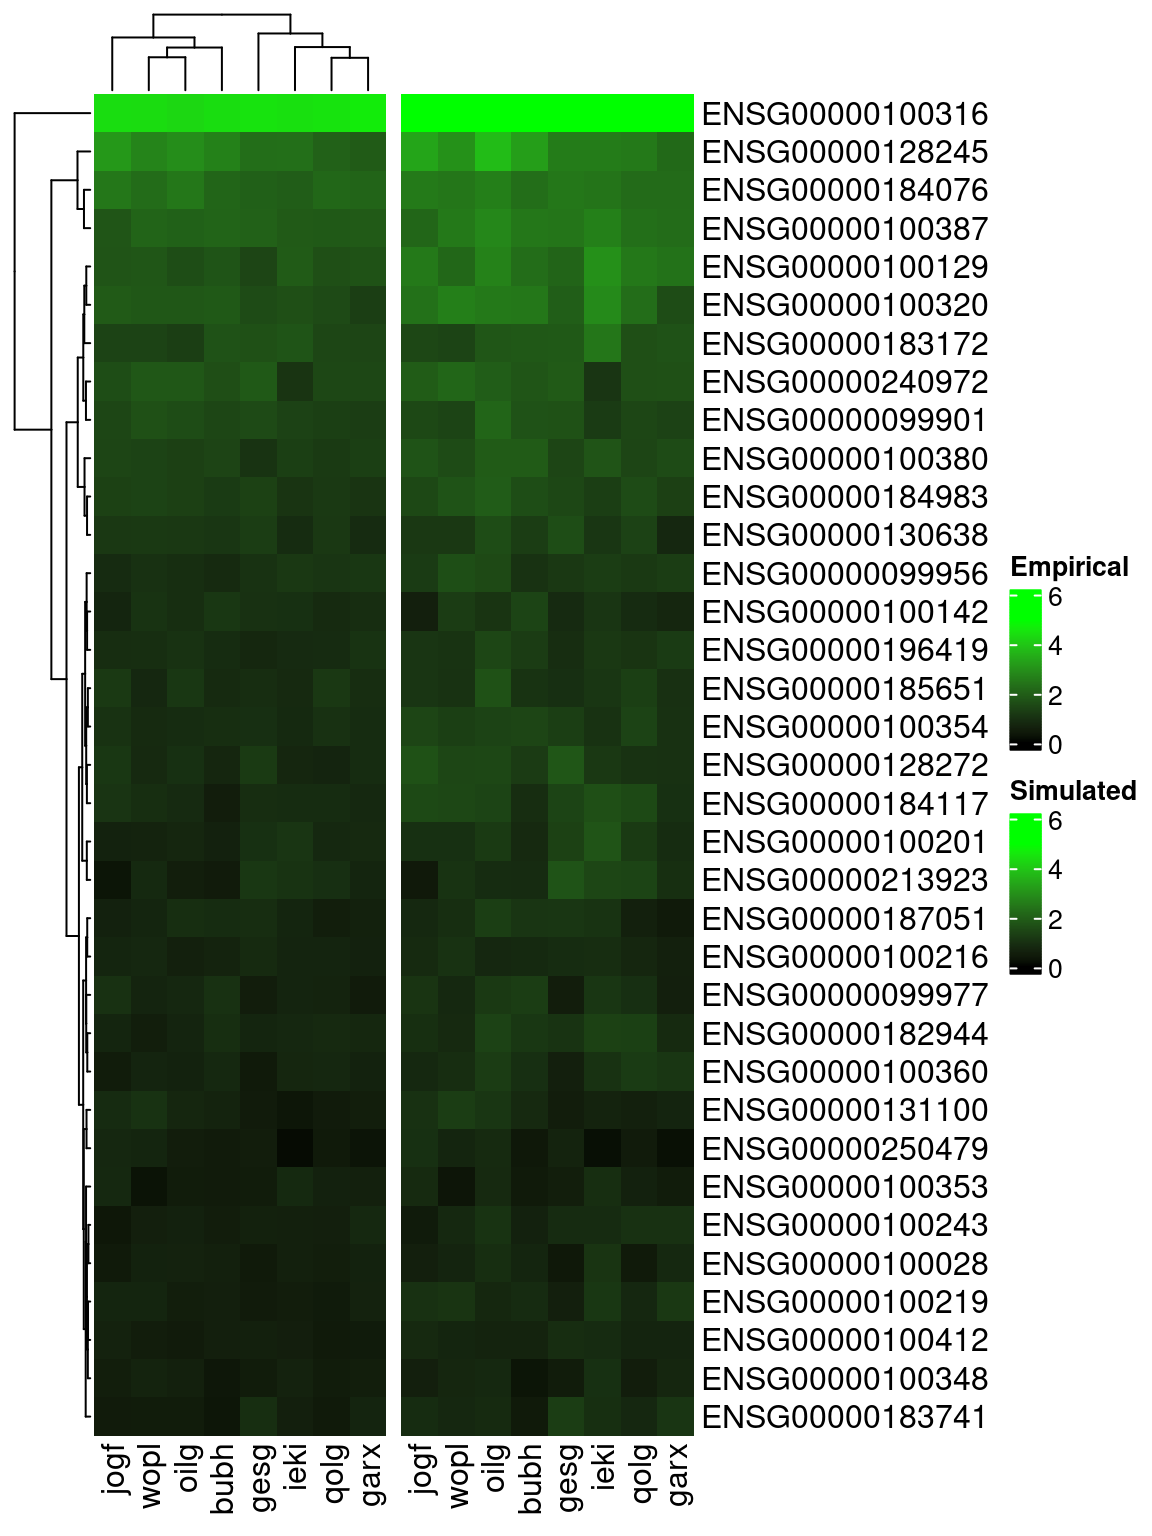 Pattern of mean aggregated logcount expression for top 35 most highly expressed genes (rows) across 8 individuals (columns), from (left) empirical data and (right) splatPop simulated data with individual-level properties replicated.